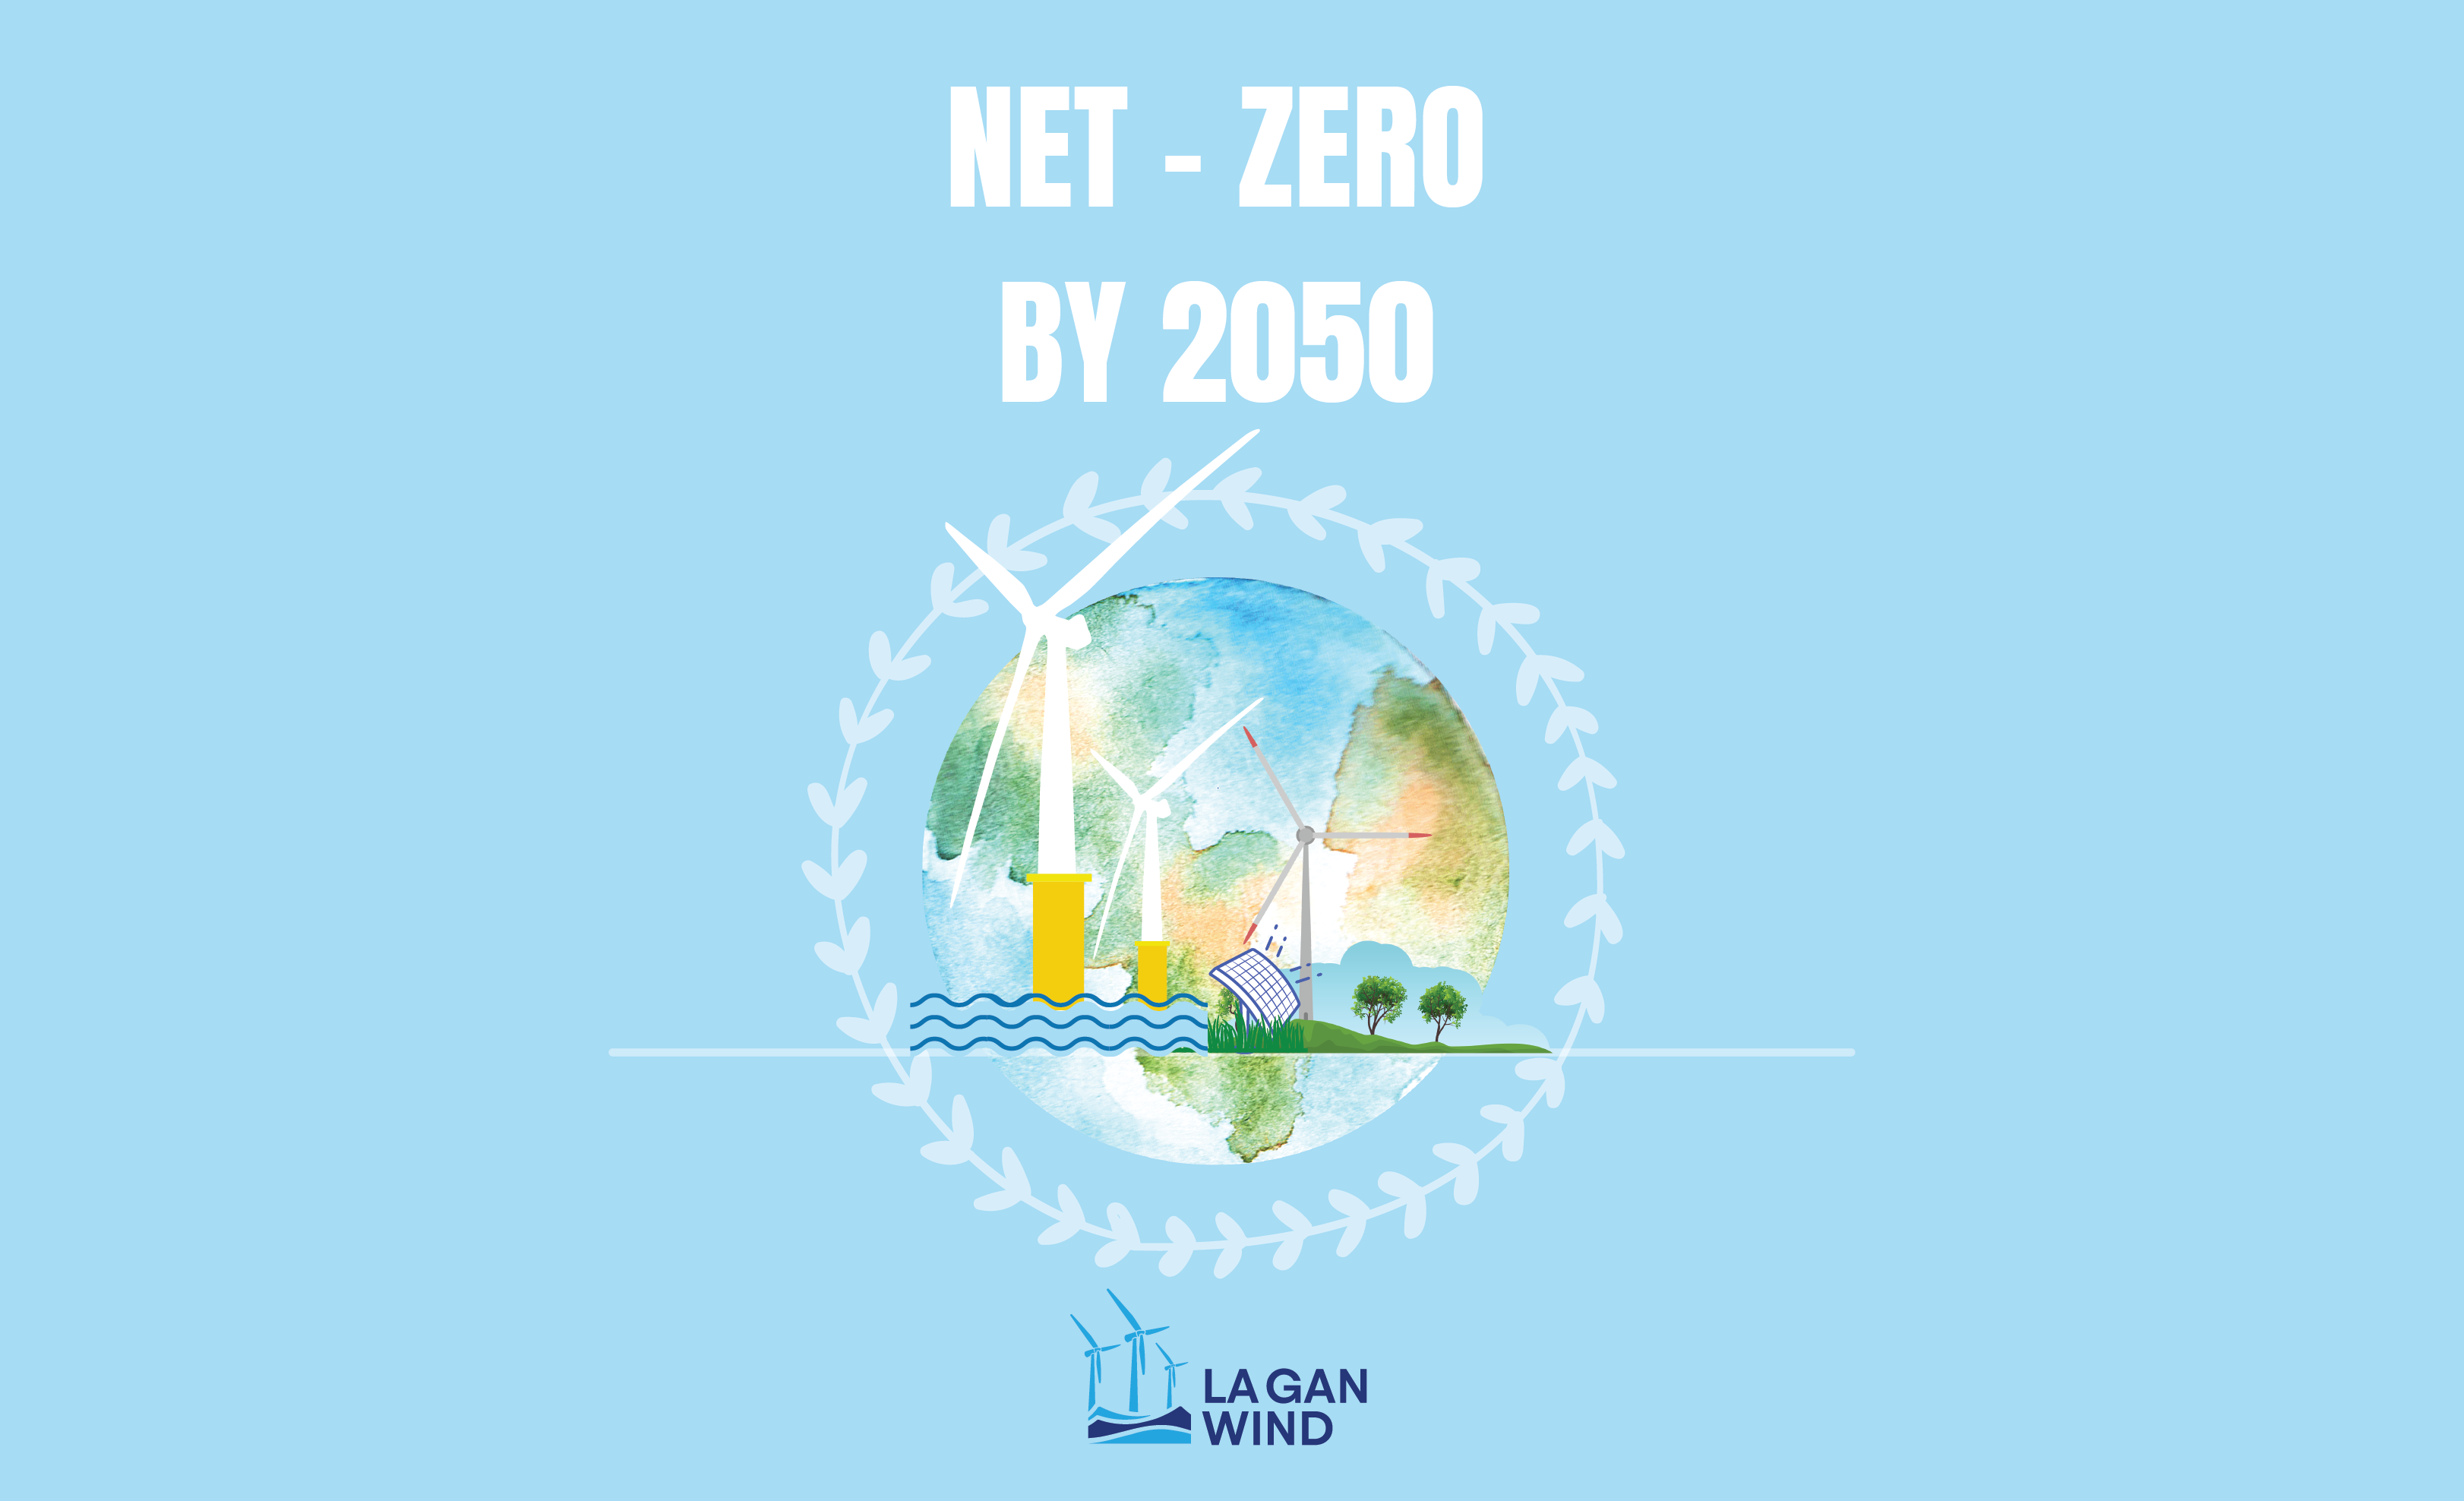 The Development Manager of COP shared his views in the interviewed articles about the strong commitment of Vietnam to reach its net-zero carbon emission target by 2050.